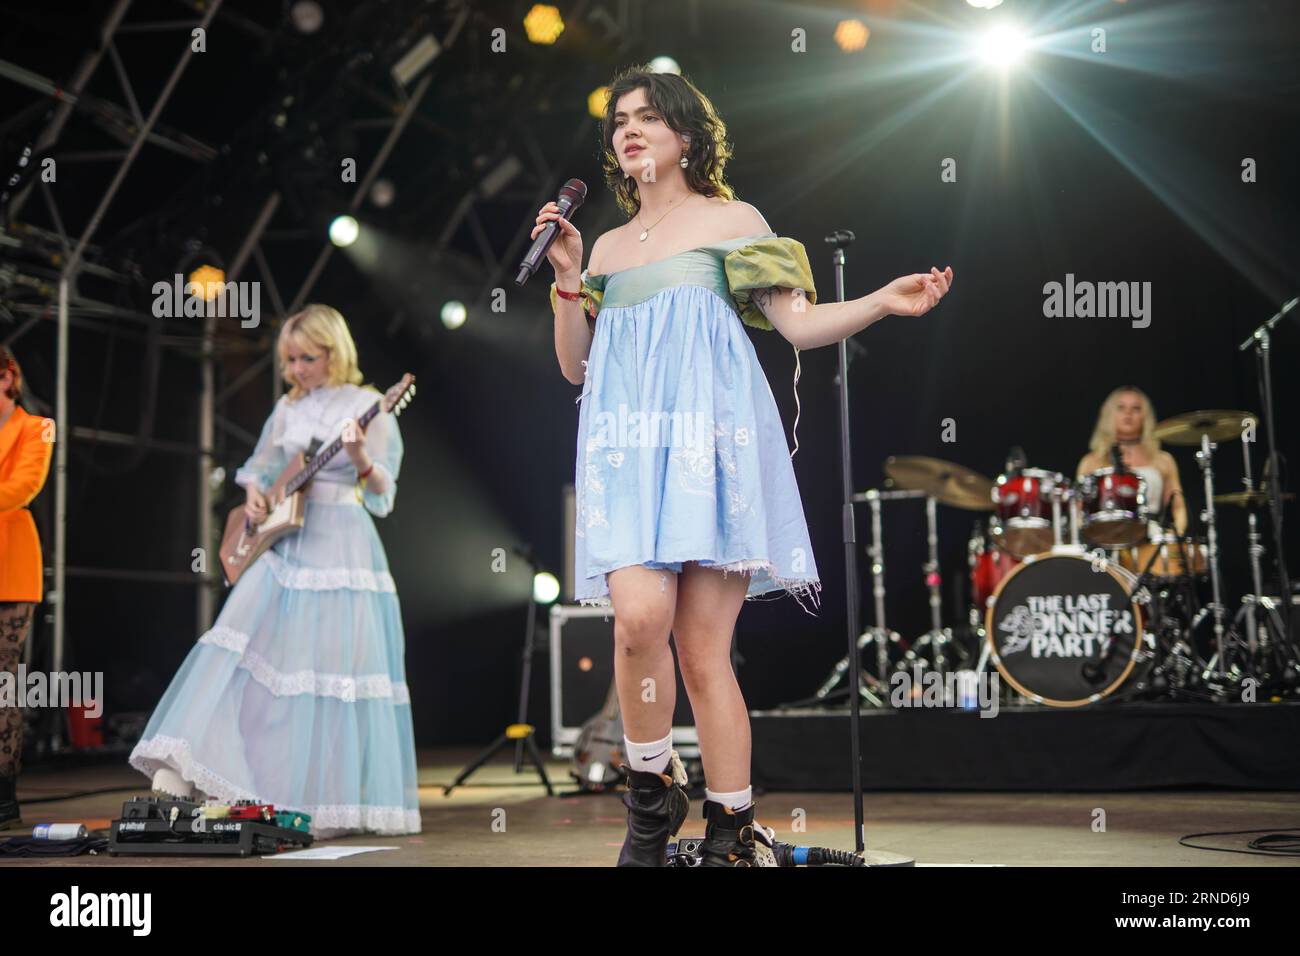 Dorset, UK. Thursday, 31 August, 2023. Abigail Morris of The Last Dinner Party performing at the 2023 edition of the End of the Road festival at Larmer Tree Gardens in Dorset. Photo date: Thursday, August 31, 2023. Photo credit should read: Richard Gray/Alamy Live News Stock Photo